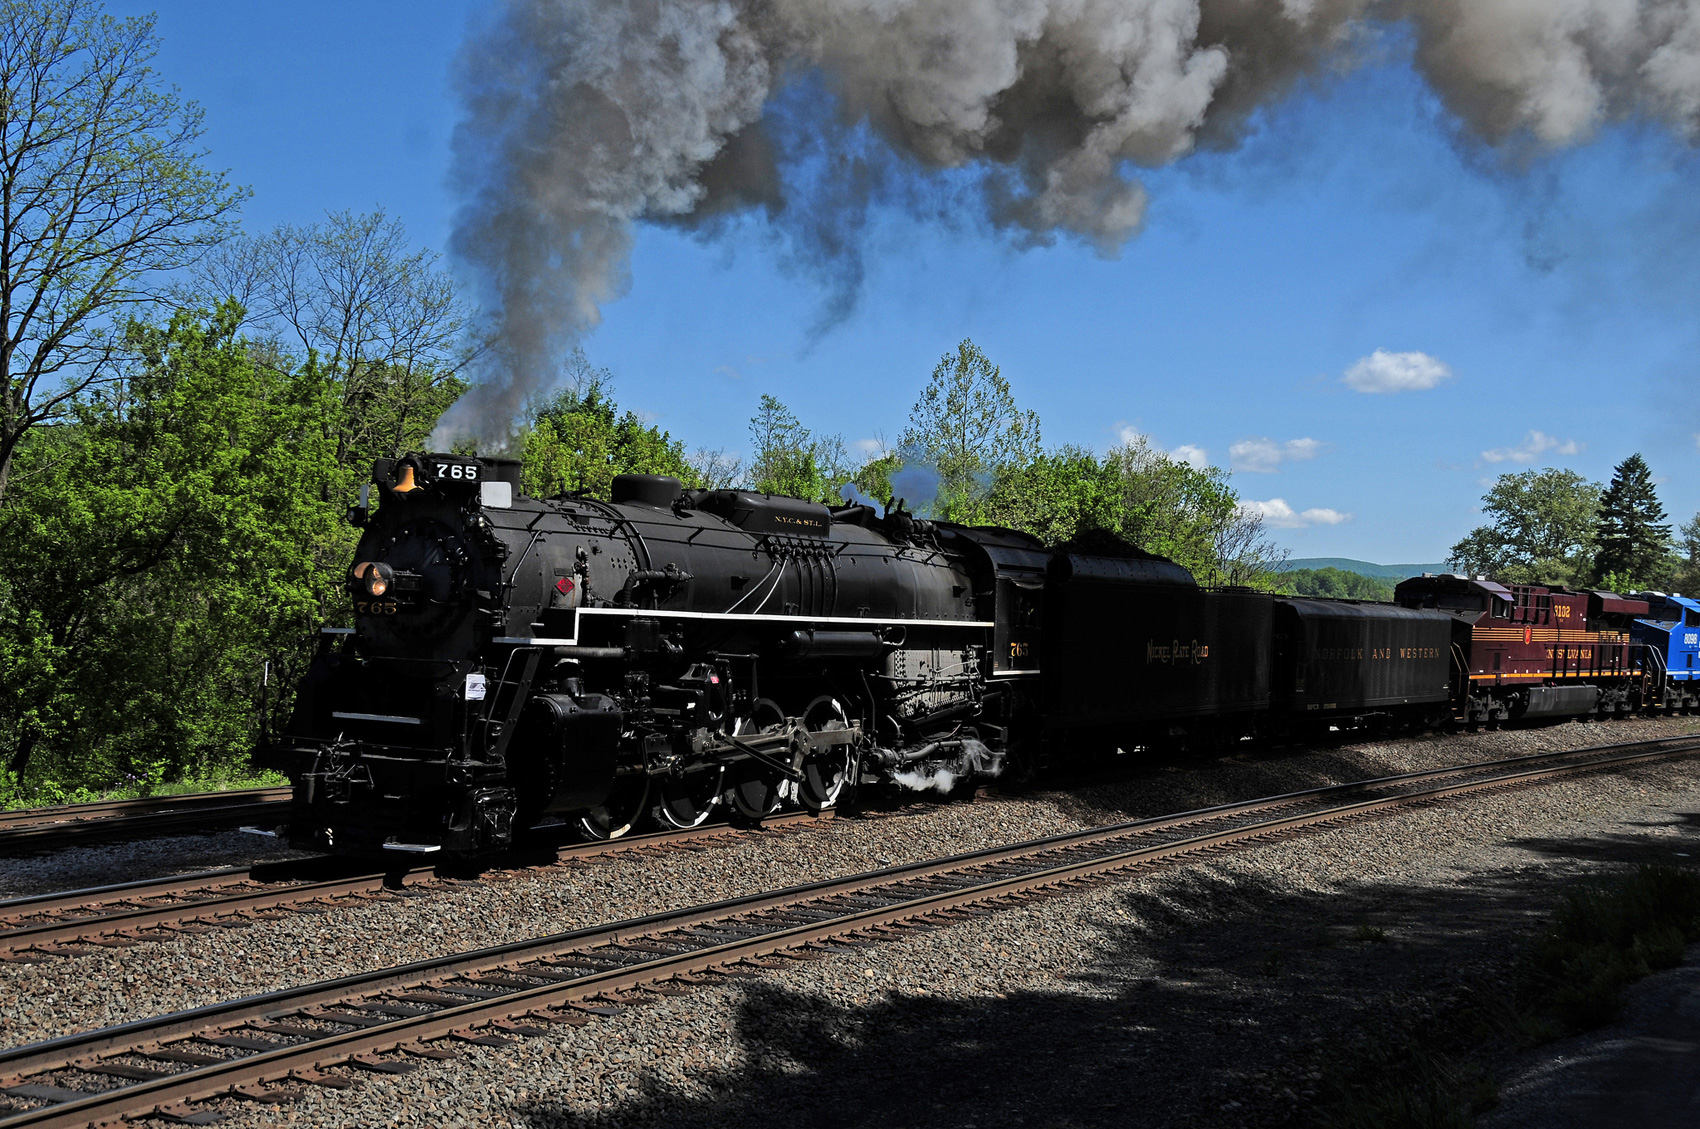 Nickel Plate Road 765 Whistle, Schedule, Excursions